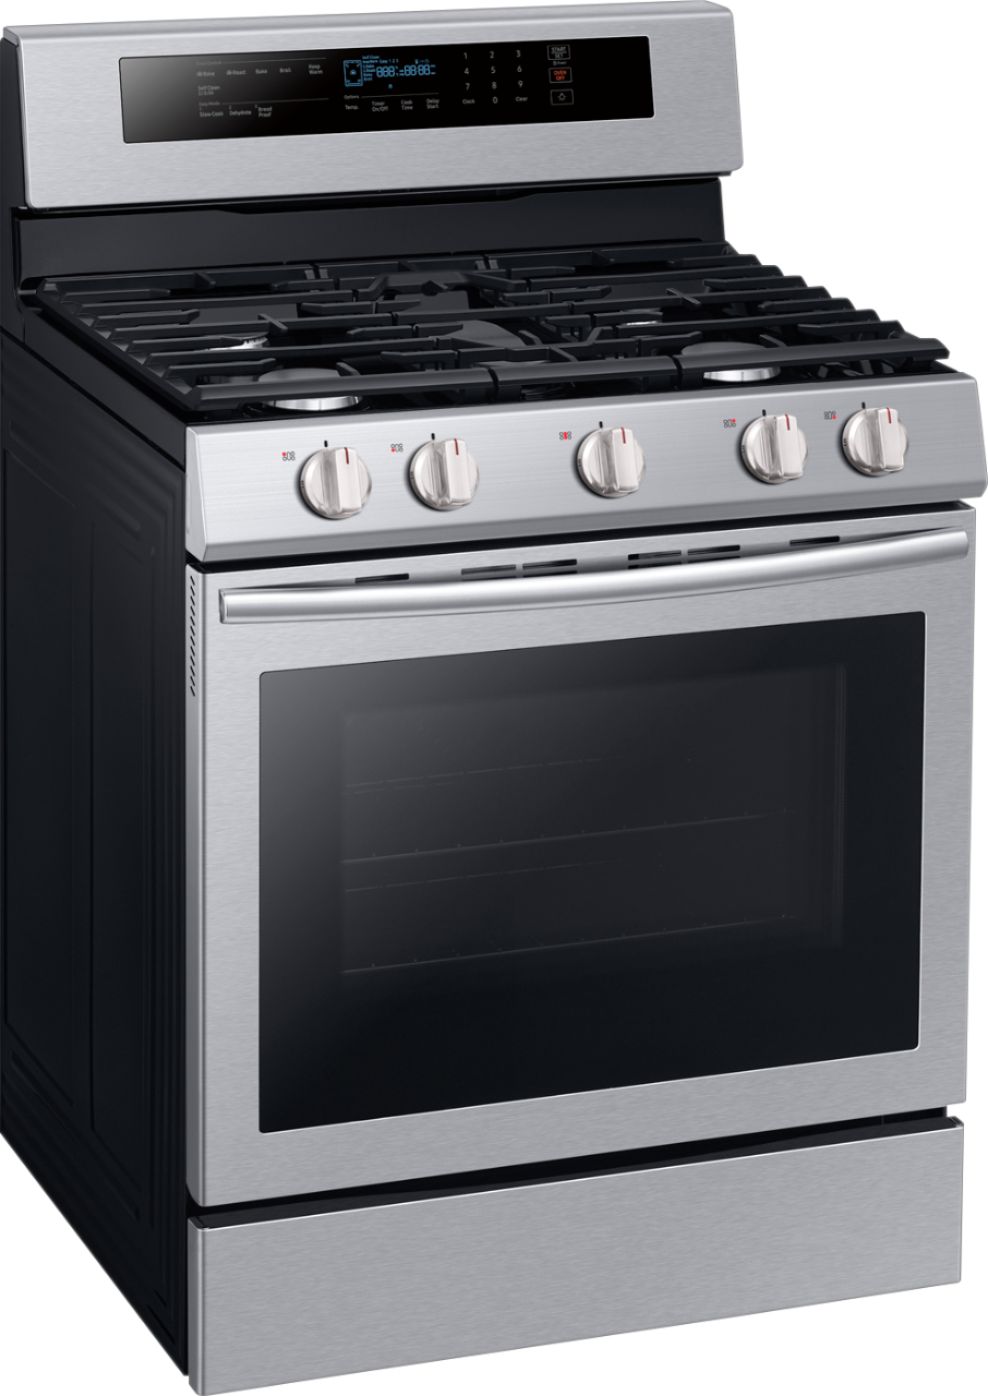 Angle View: Samsung - 5.8 Cu. Ft. Self-cleaning Freestanding Gas Convection Range - Stainless steel